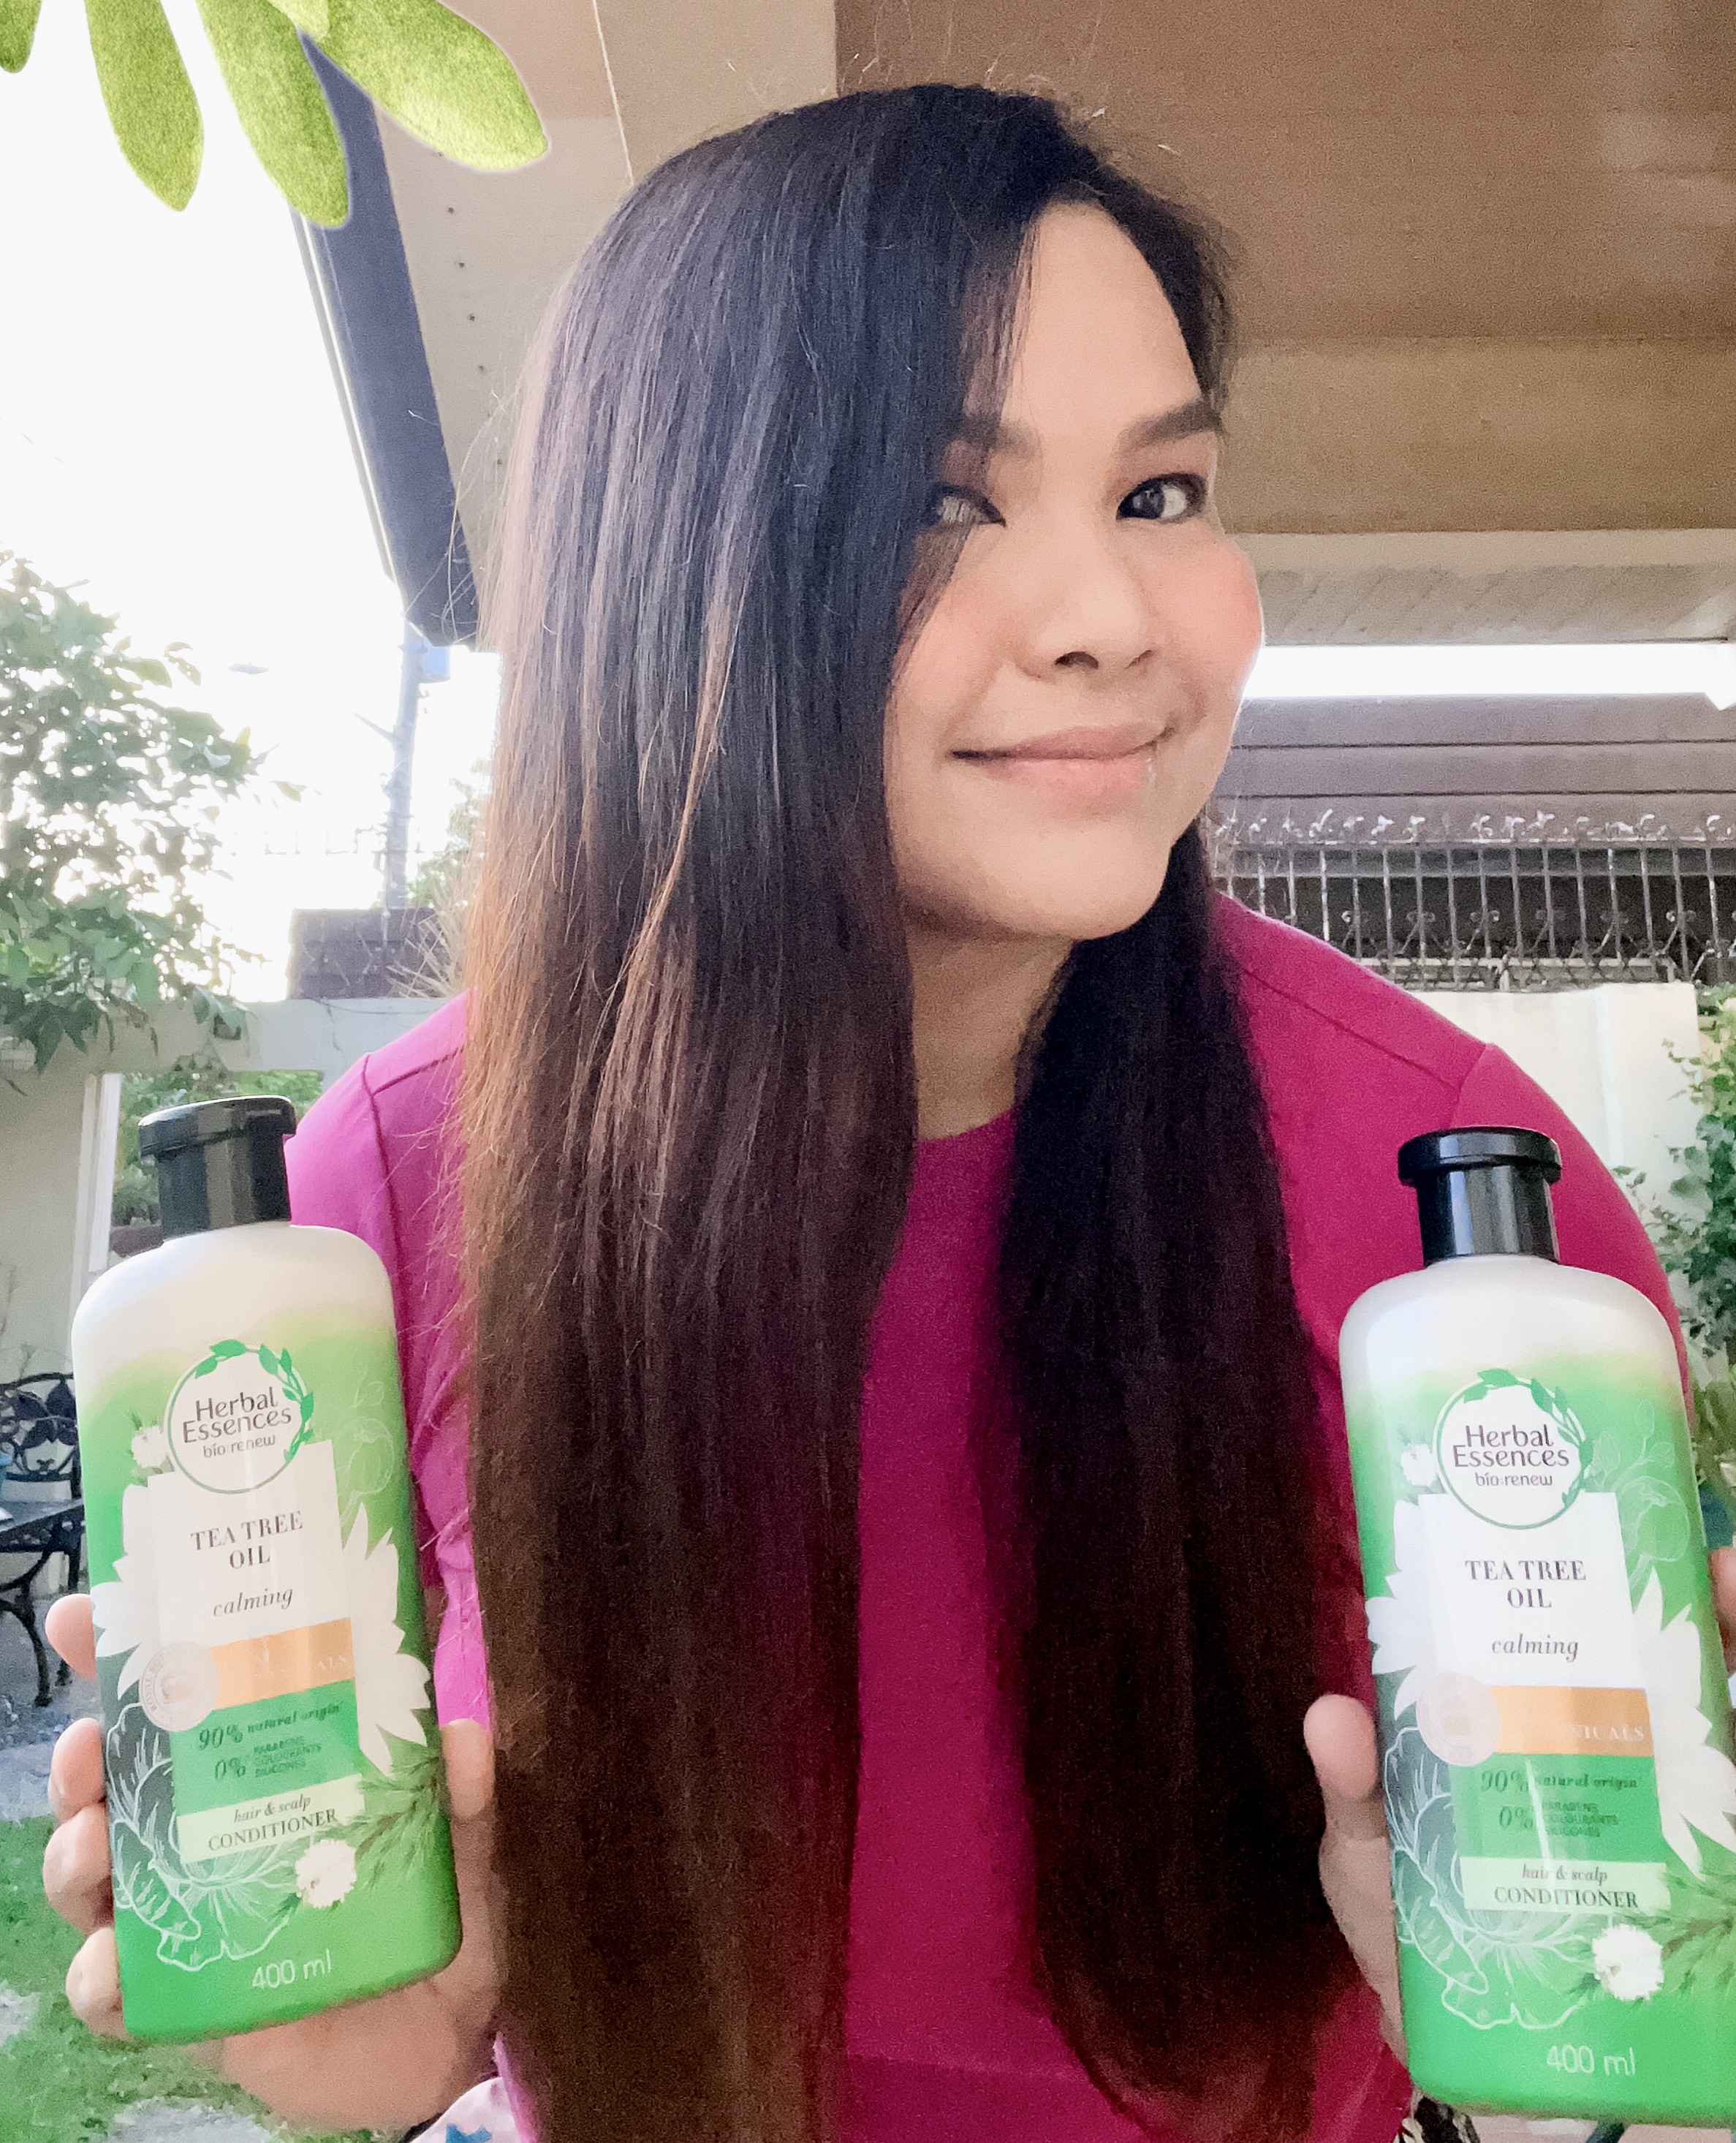 Herbal Essences Bio Renew Tree Argan Oil Morocco Shampoo and Conditioner: Perfect for dry